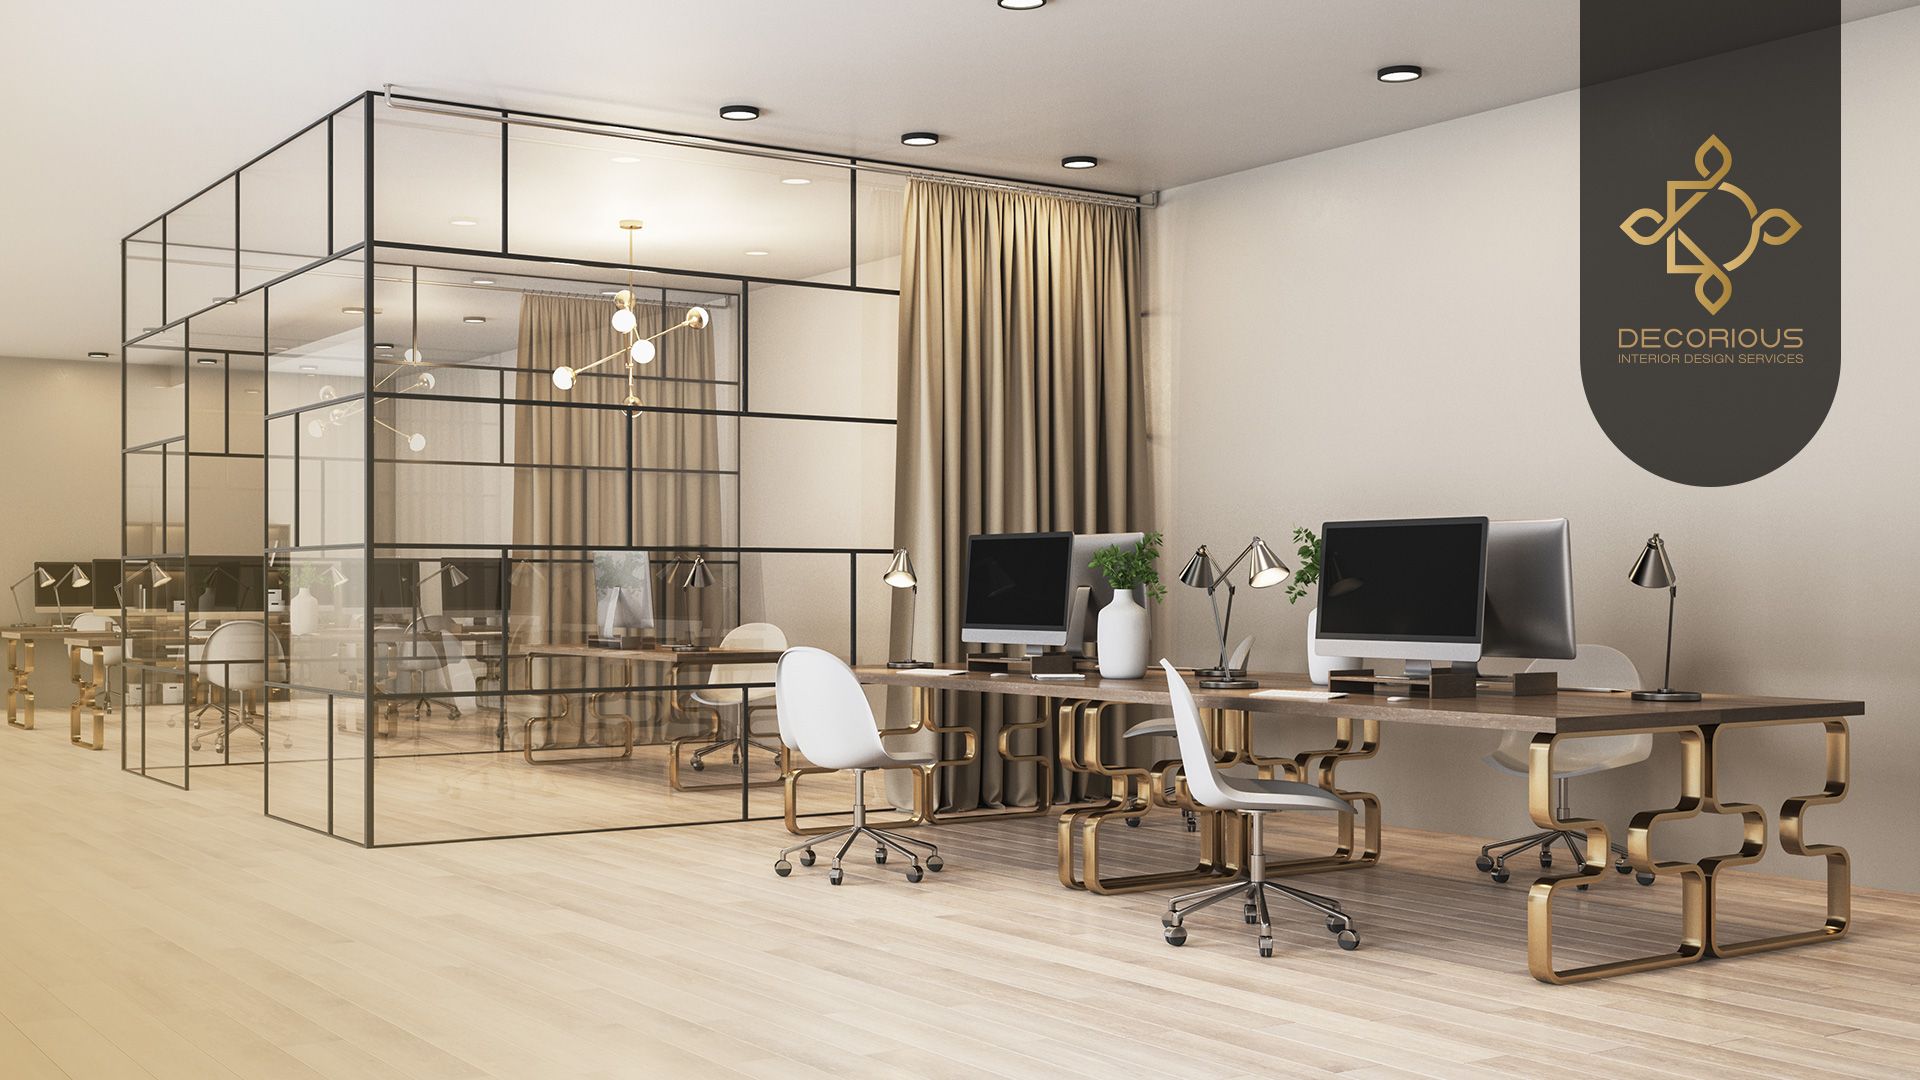 Top 10 Trending Small Office Design Ideas for 2021